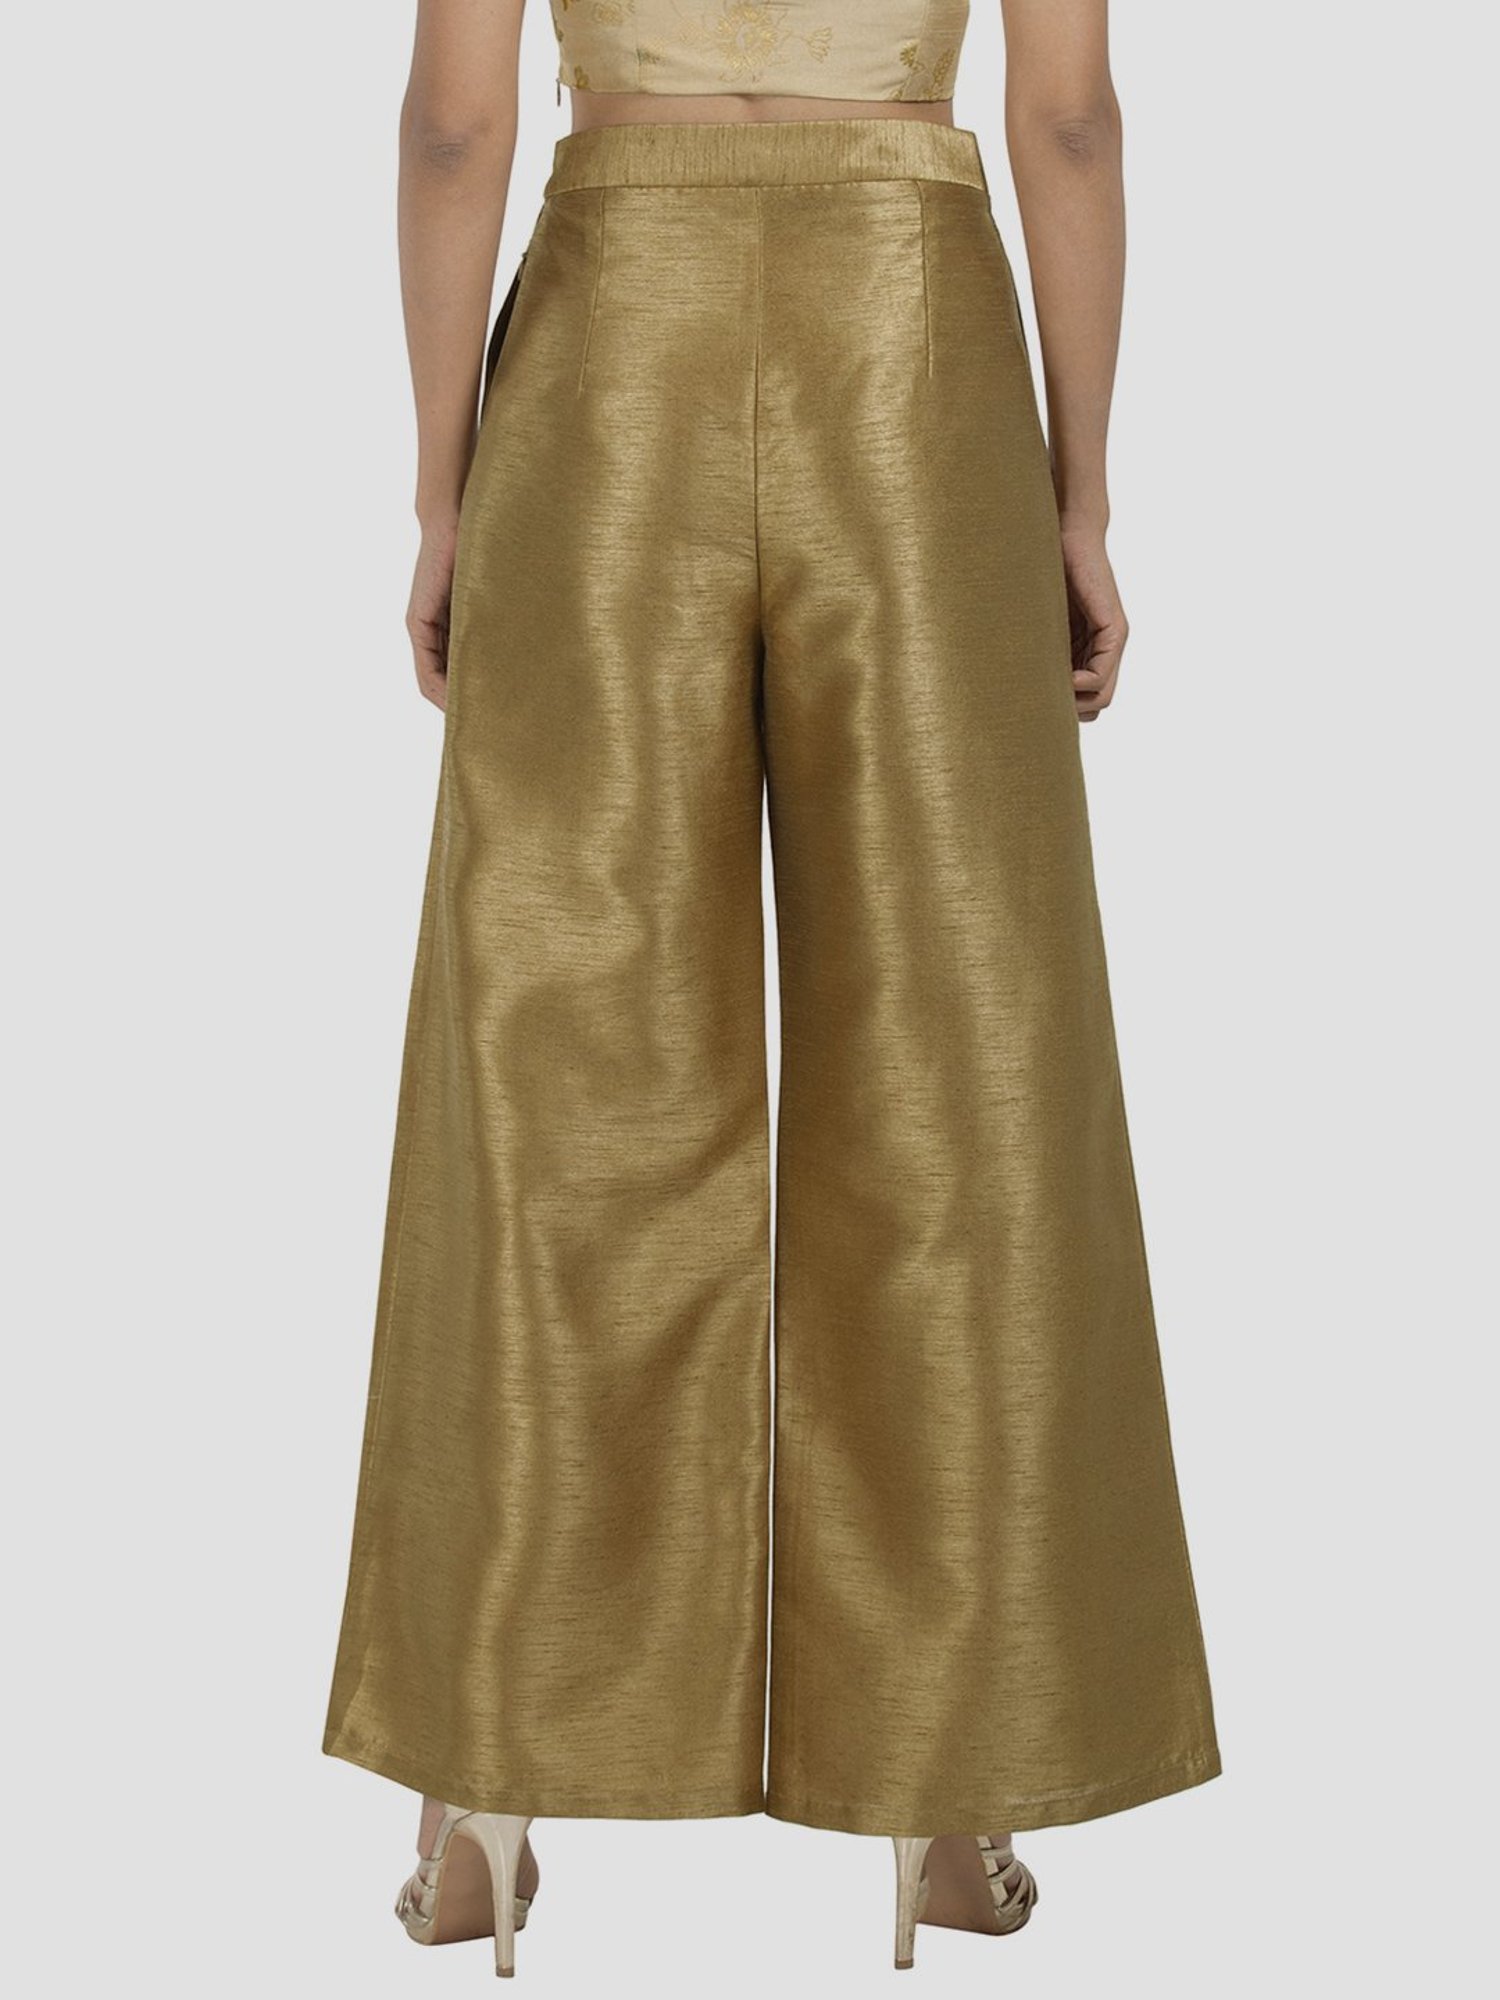 Indya Ethnic Bottoms  Indya Rose Gold Foil Flared Palazzo Pants Online   Nykaa Fashion